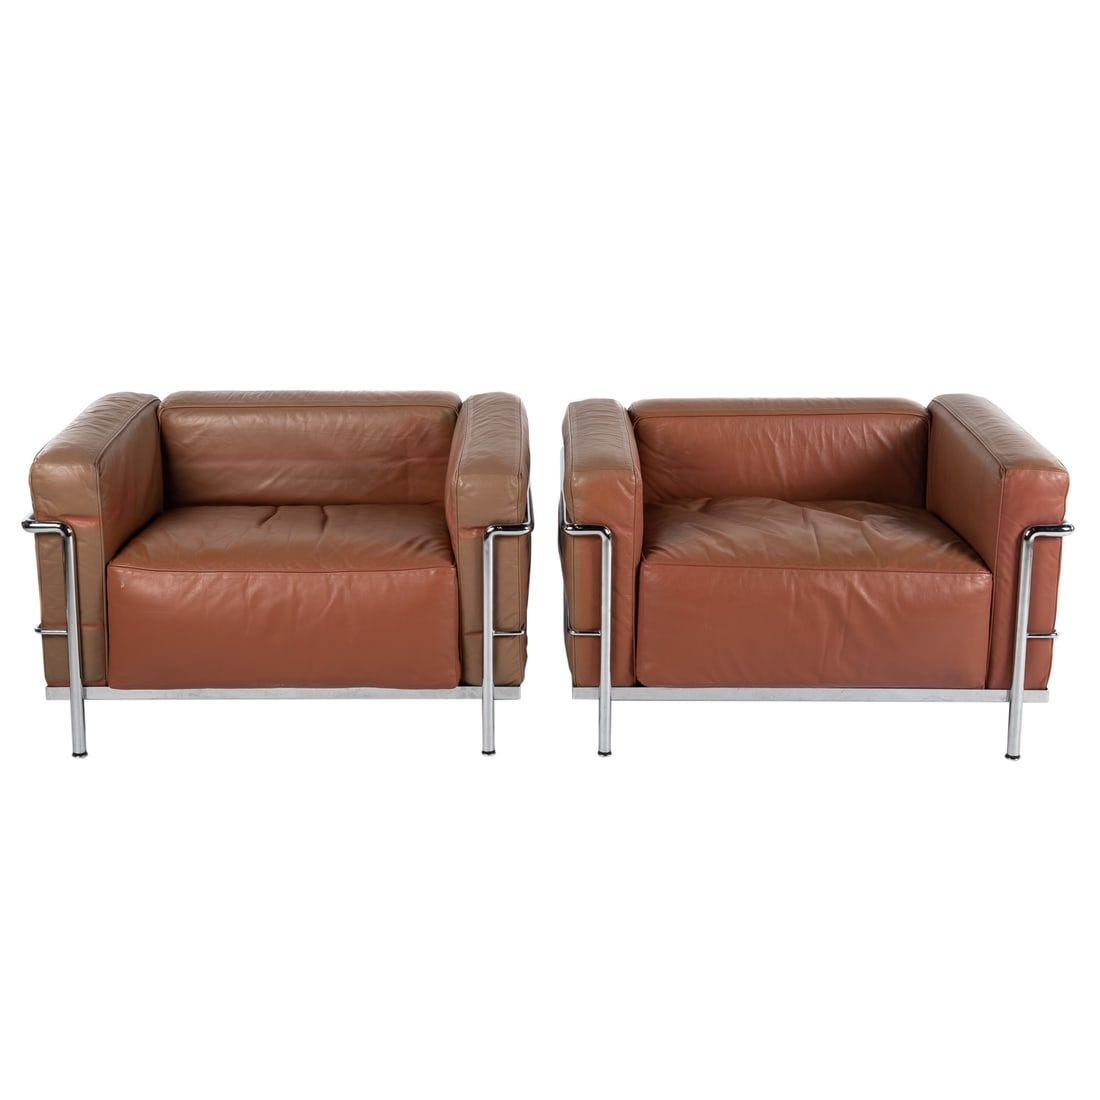 A Pair of Le Corbusier LC3 Chairs by Cassina